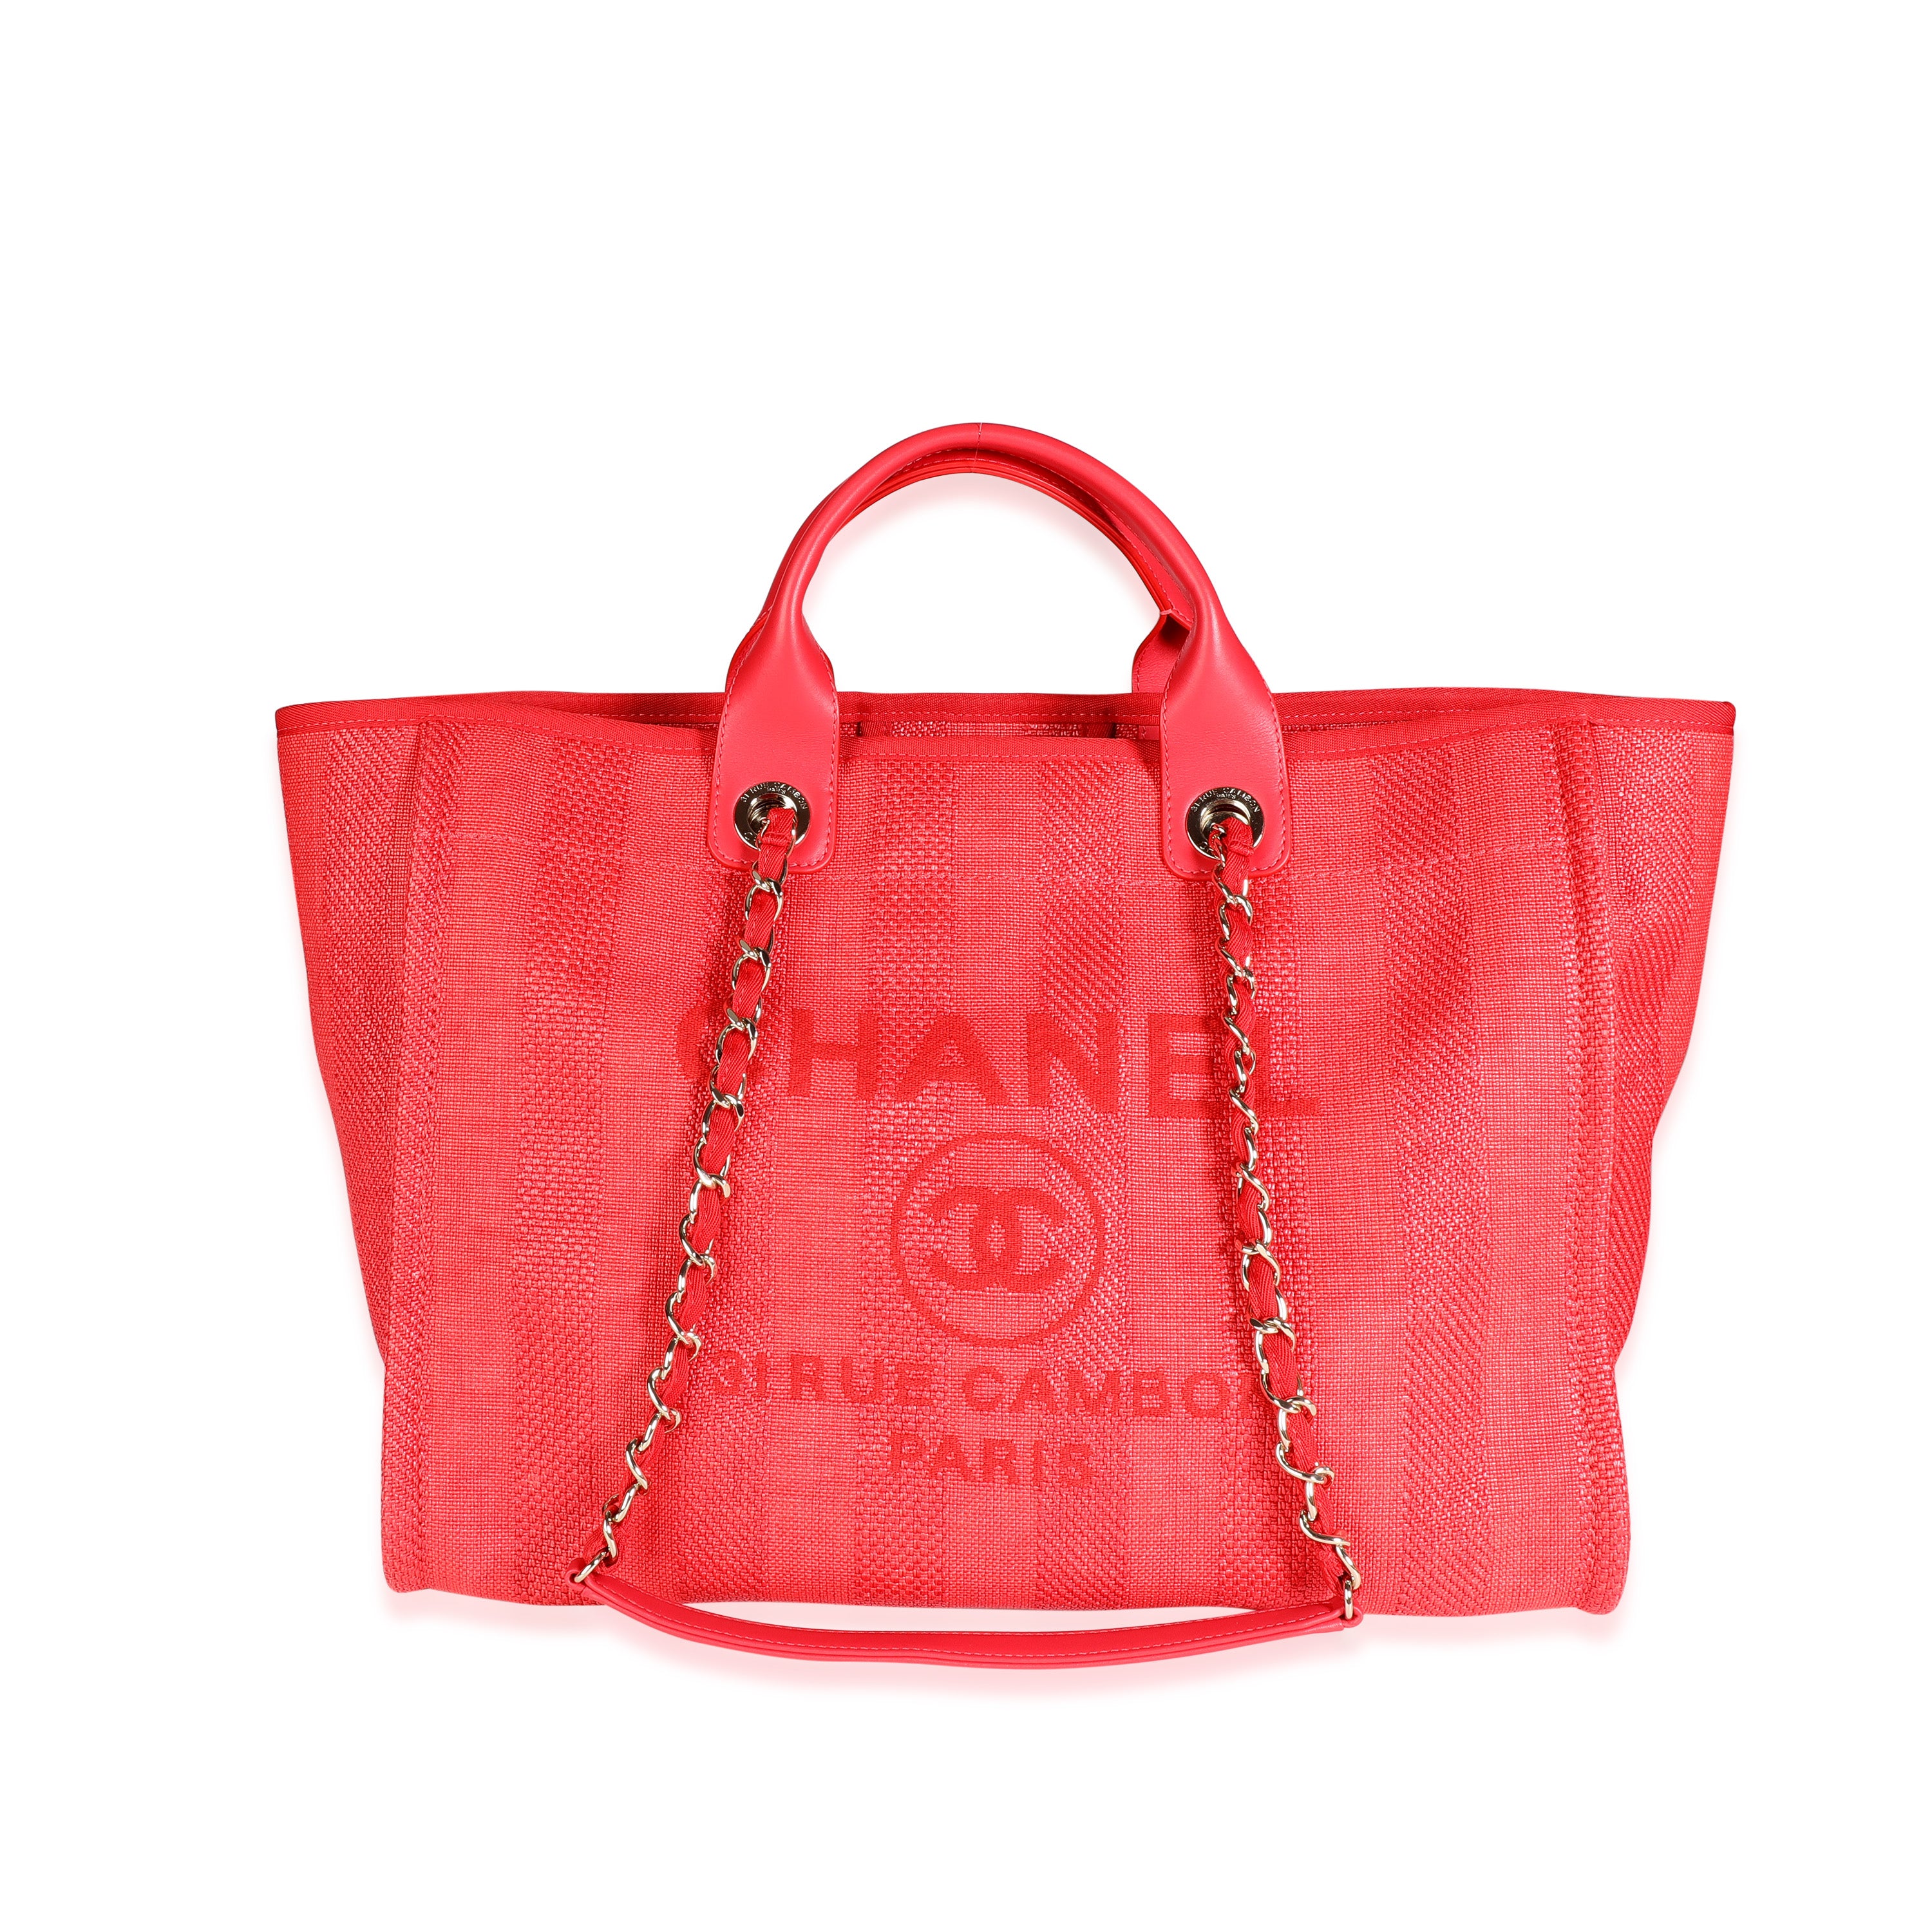 CHANEL Tote Red Bags & Handbags for Women